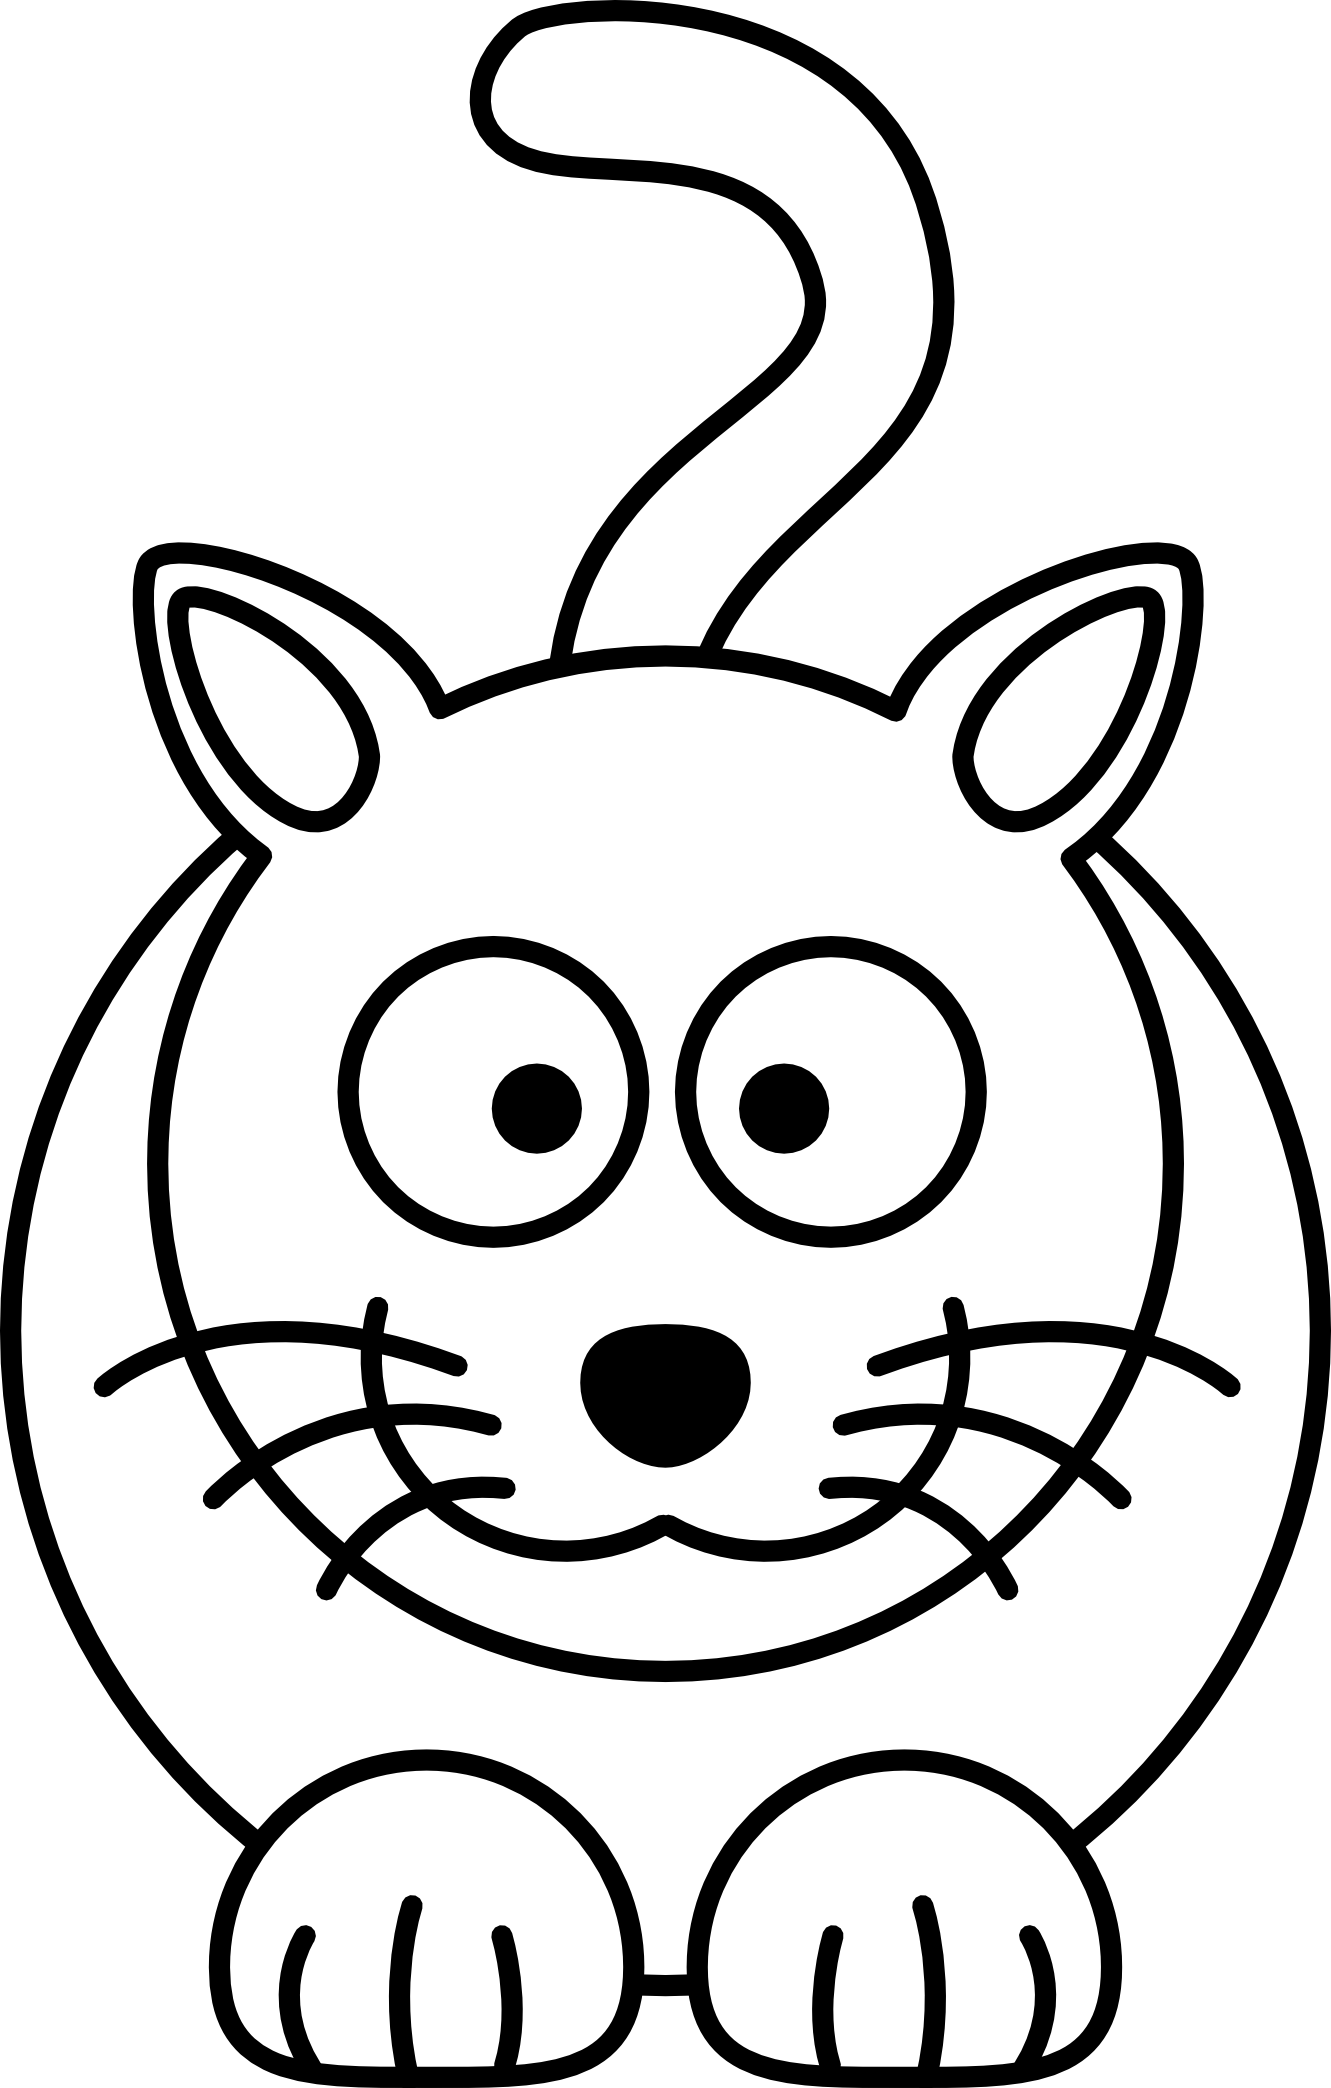 Cartoon Cat Black White Line Art Coloring Book Colouring Drawing ...